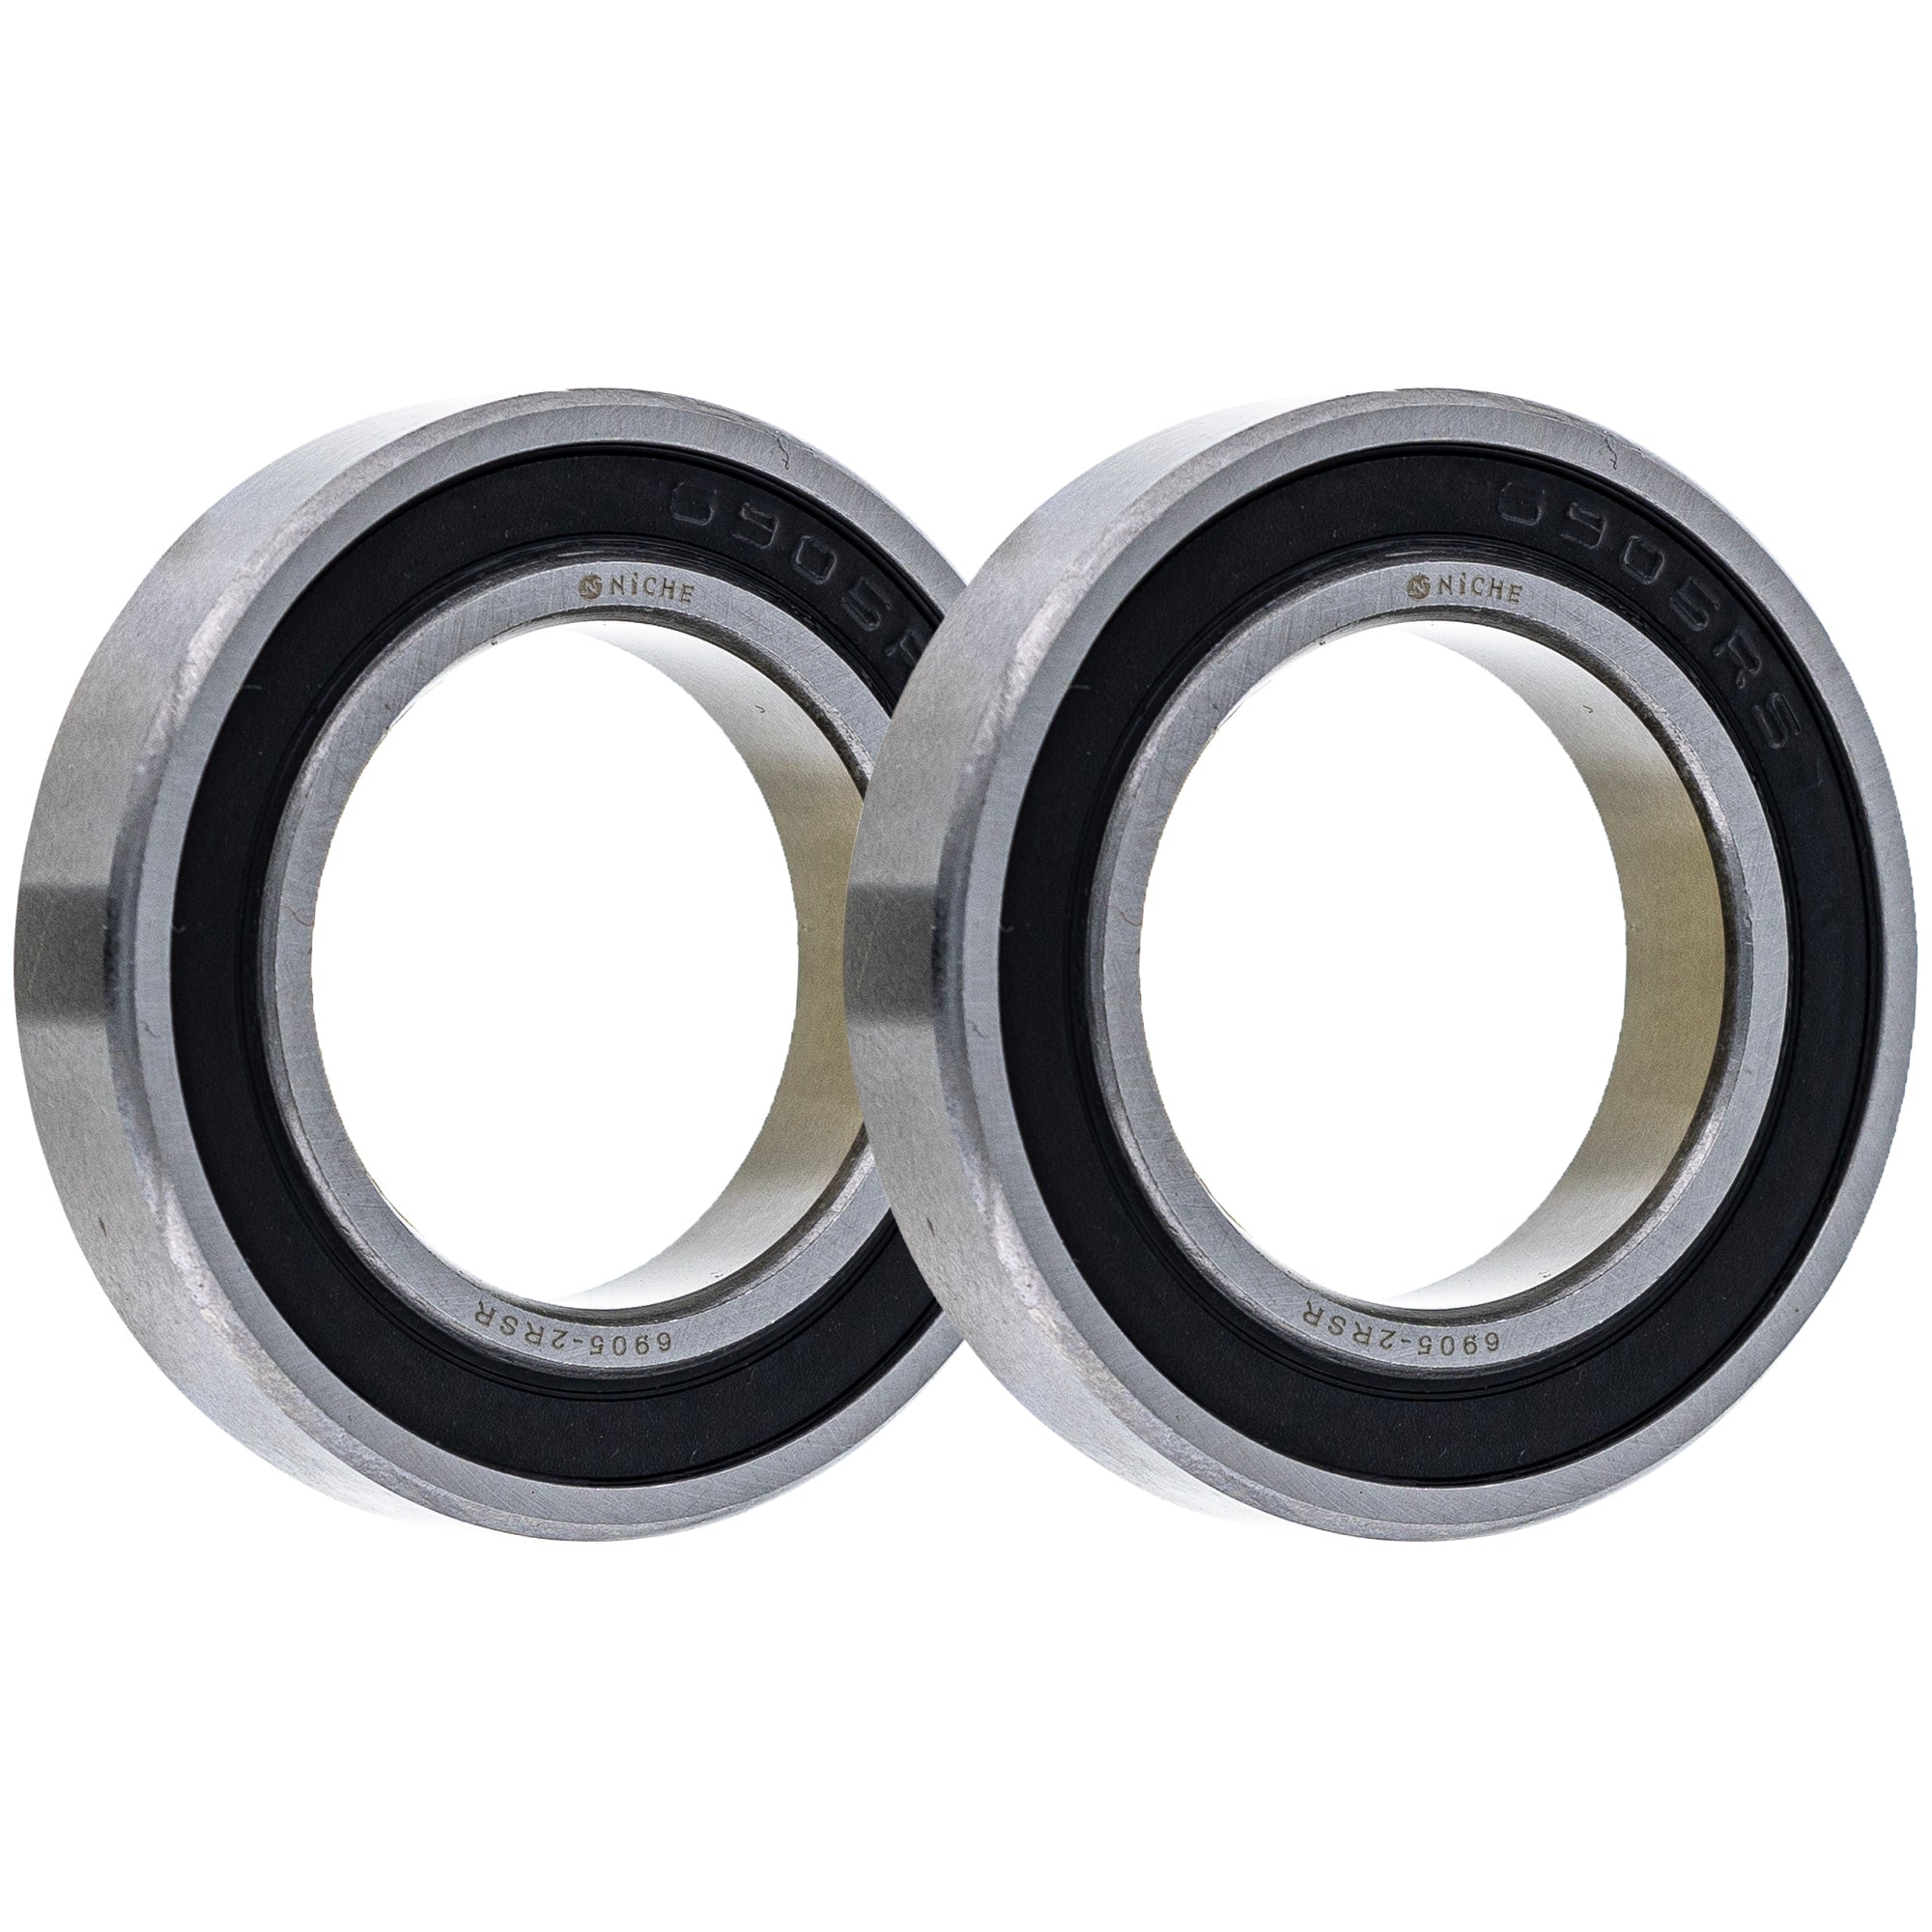 Single Row, Deep Groove, Ball Bearing Pack of 2 2-Pack for zOTHER XC300 XC250 XC200 NICHE 519-CBB2338R